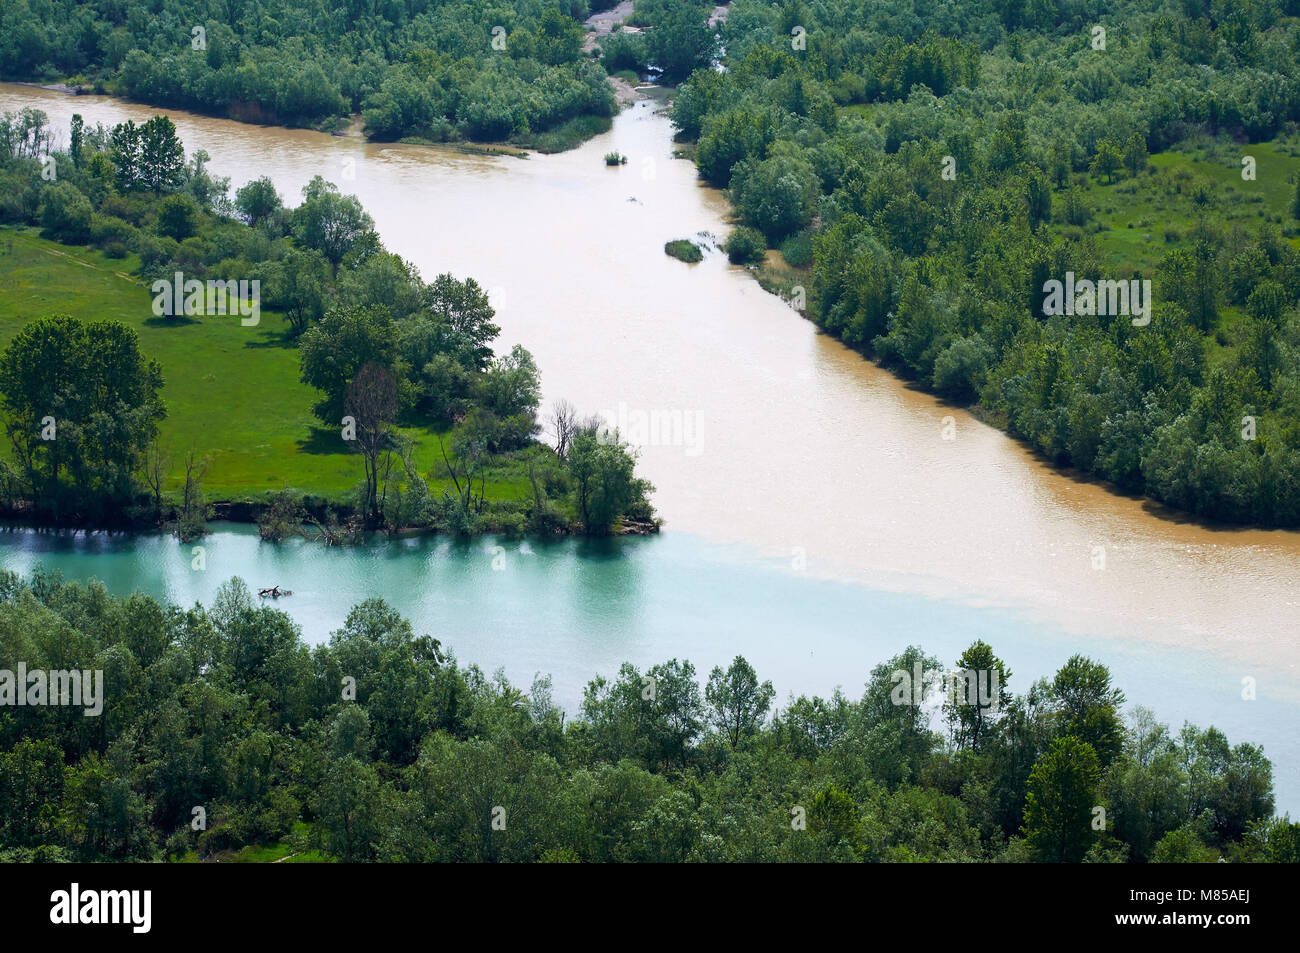 View of the Buna River after the confluence with the Drin River, Shkodra, Albania Stock Photo